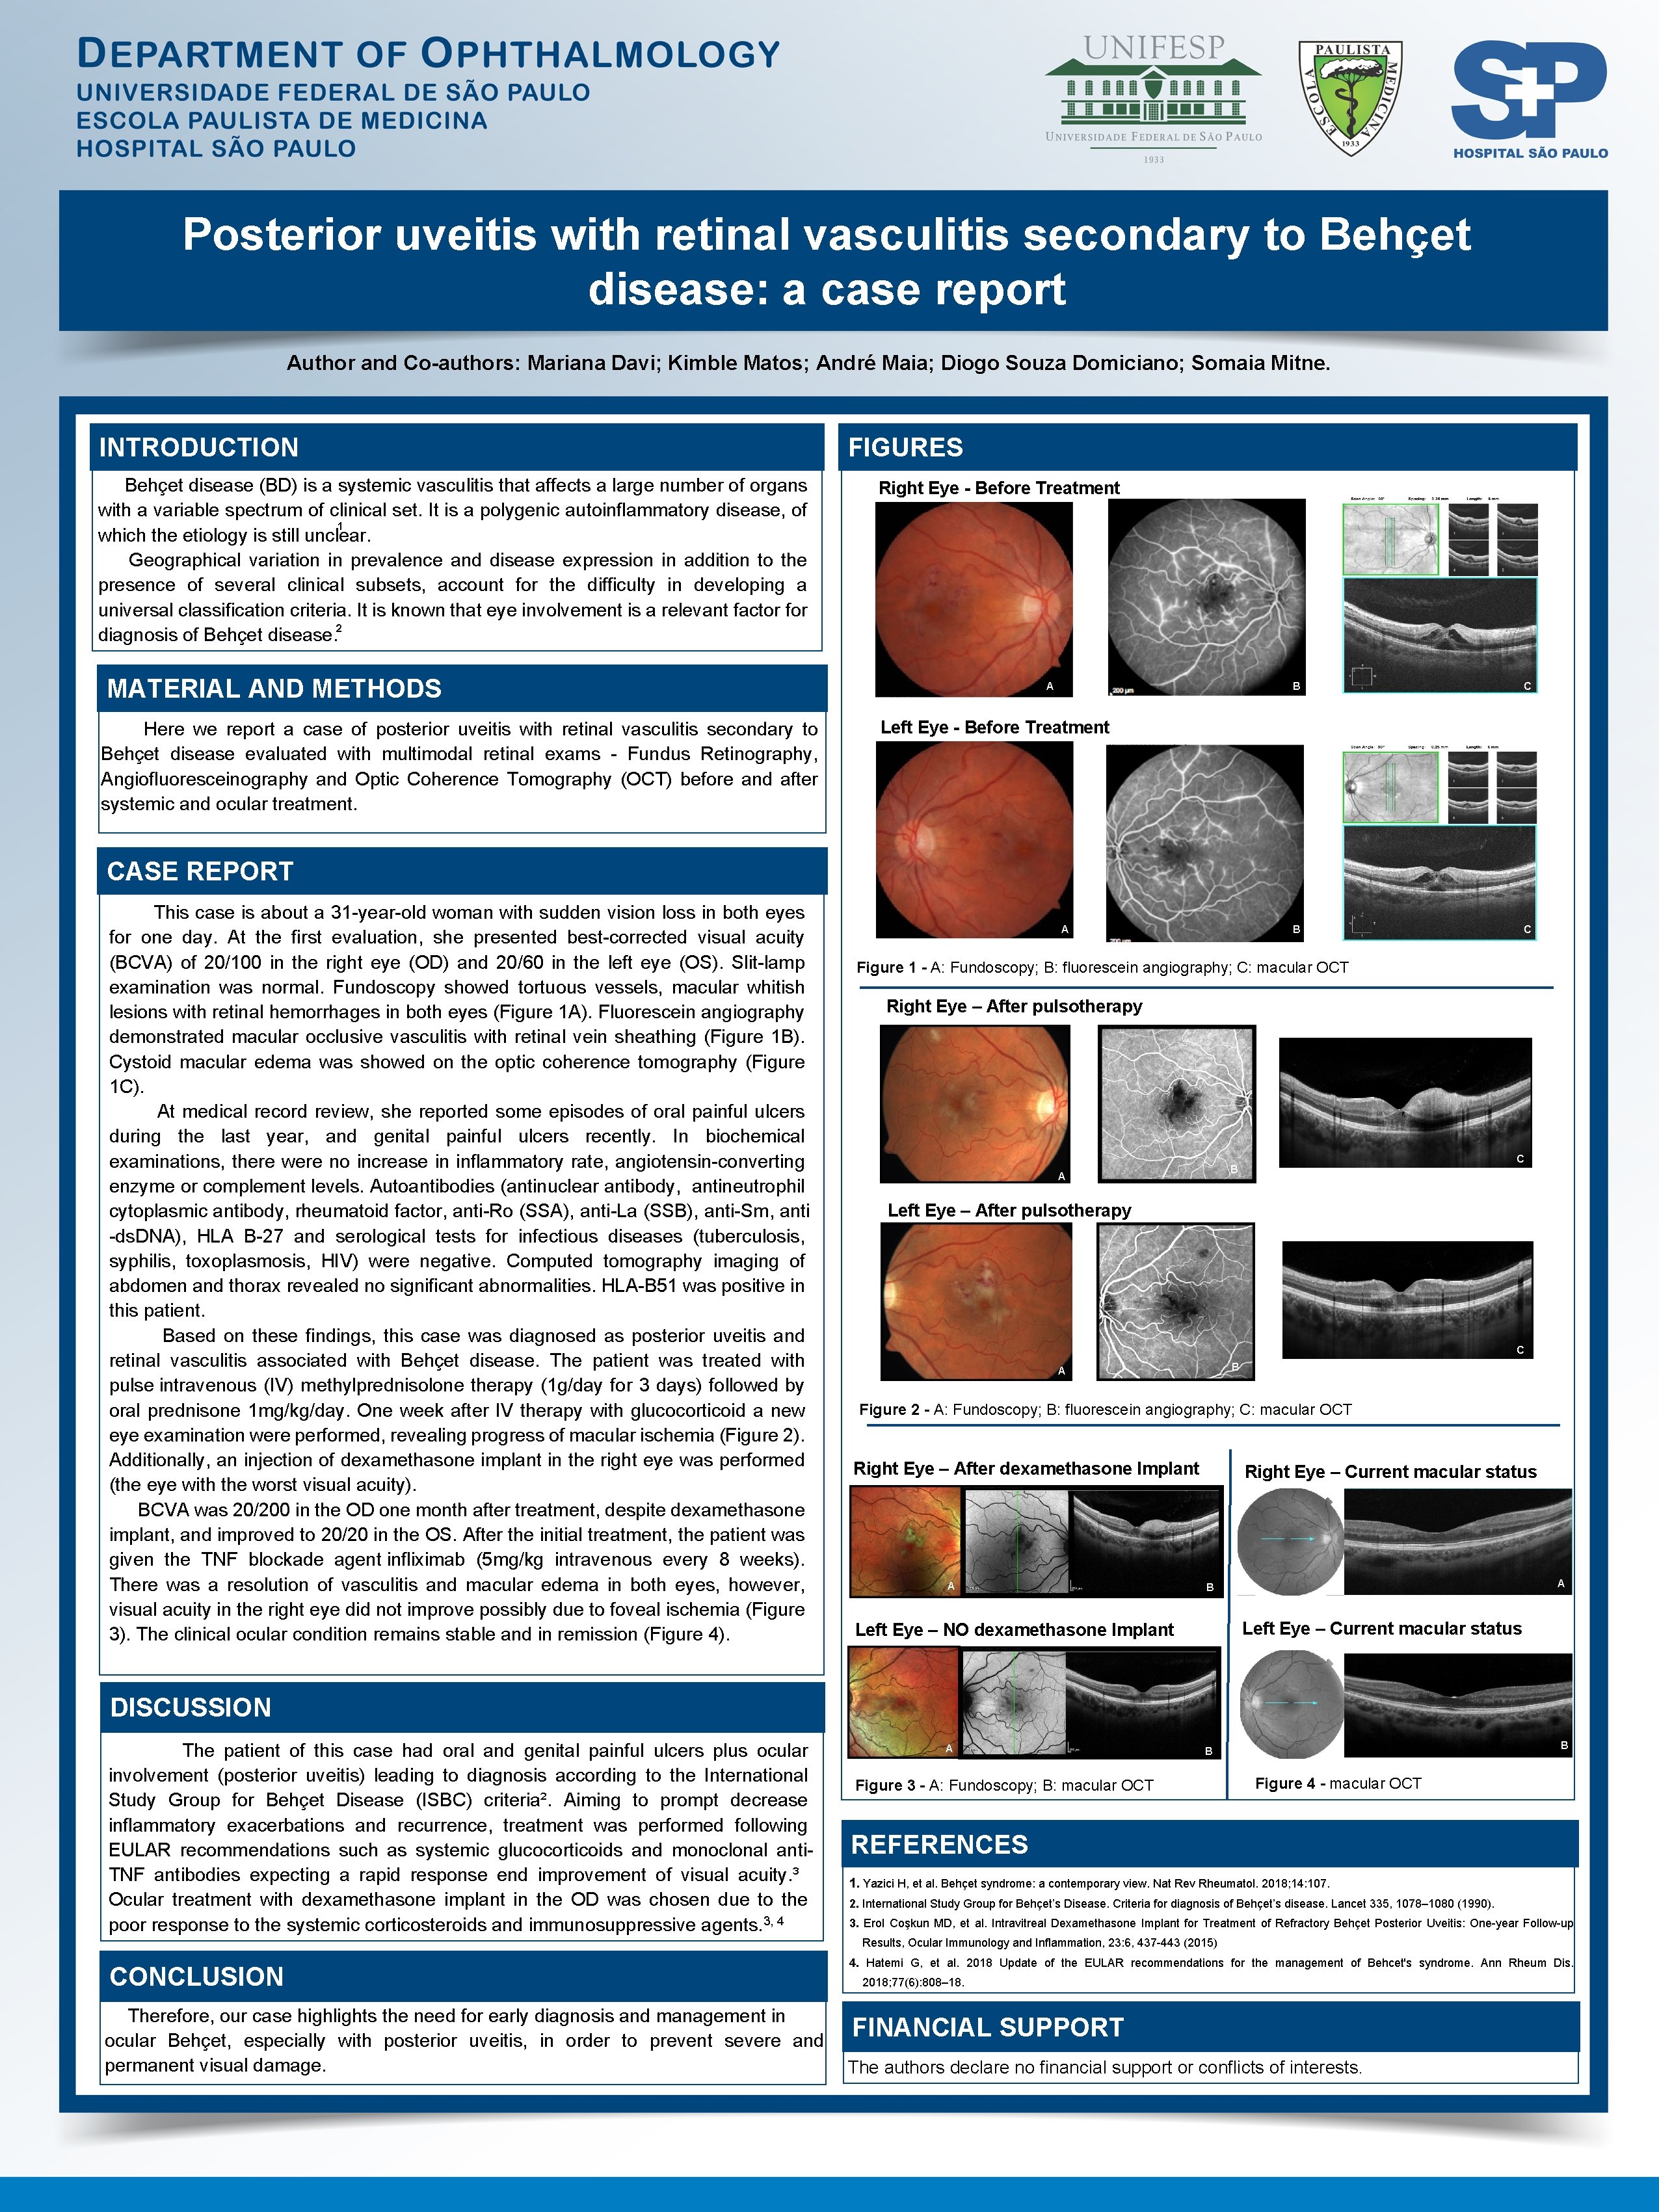 Posterior uveitis with retinal vasculitis secondary to Behçet disease: a case report Author and